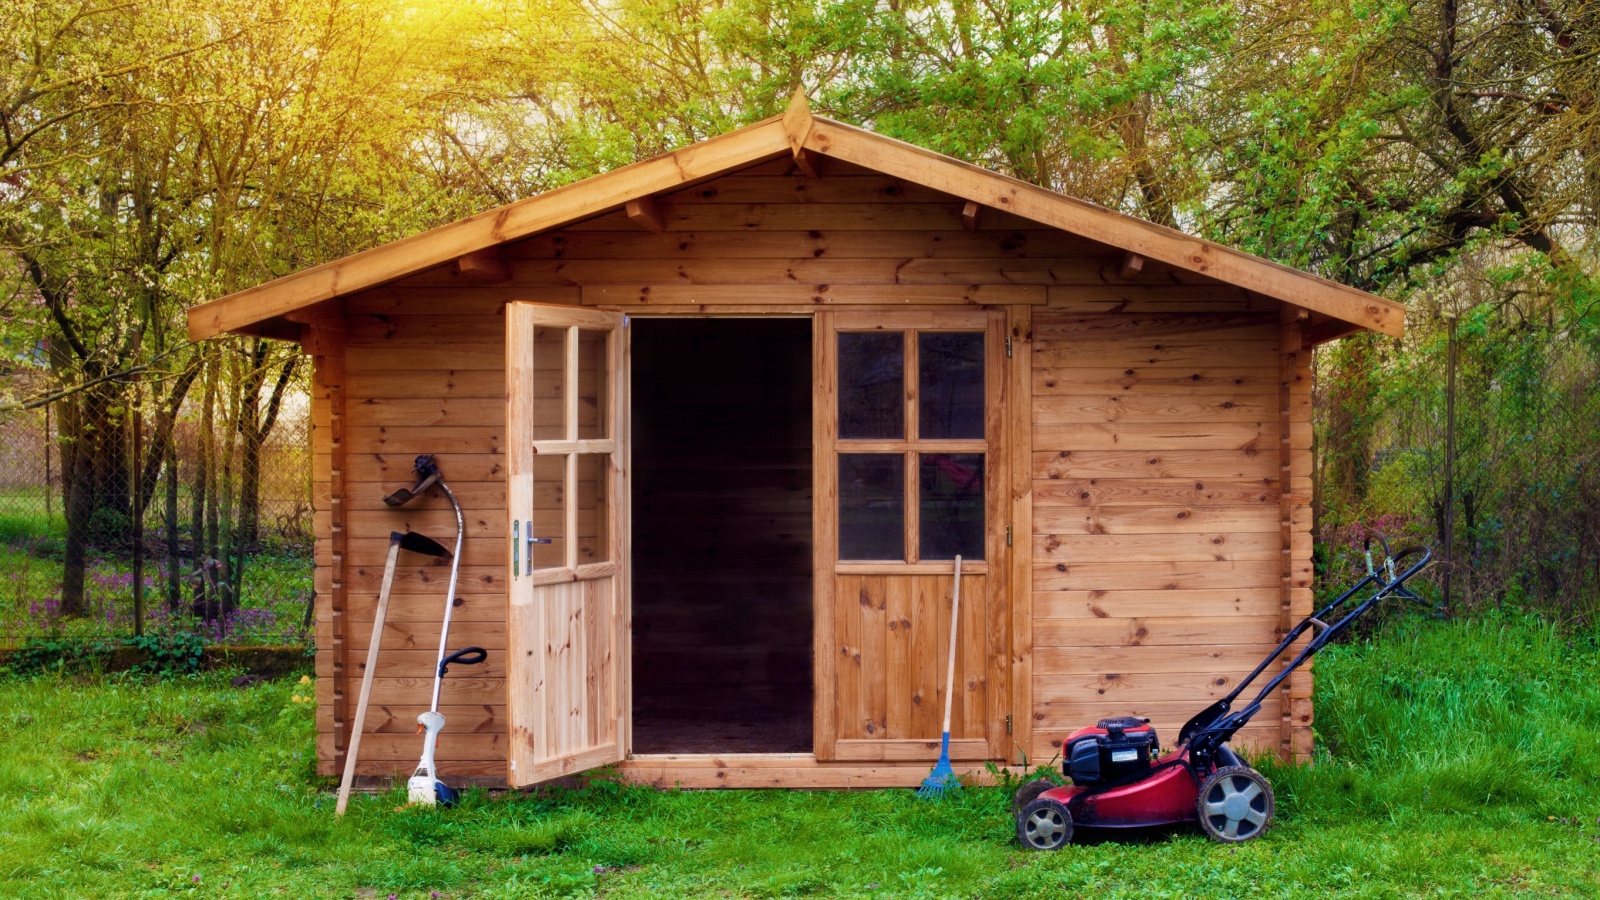 Garden shed (front view) with hoe, string trimmer, rake and grass-cutter. Gardening tools shed. Garden house on lawn in the sunset. Wooden tool-shed.